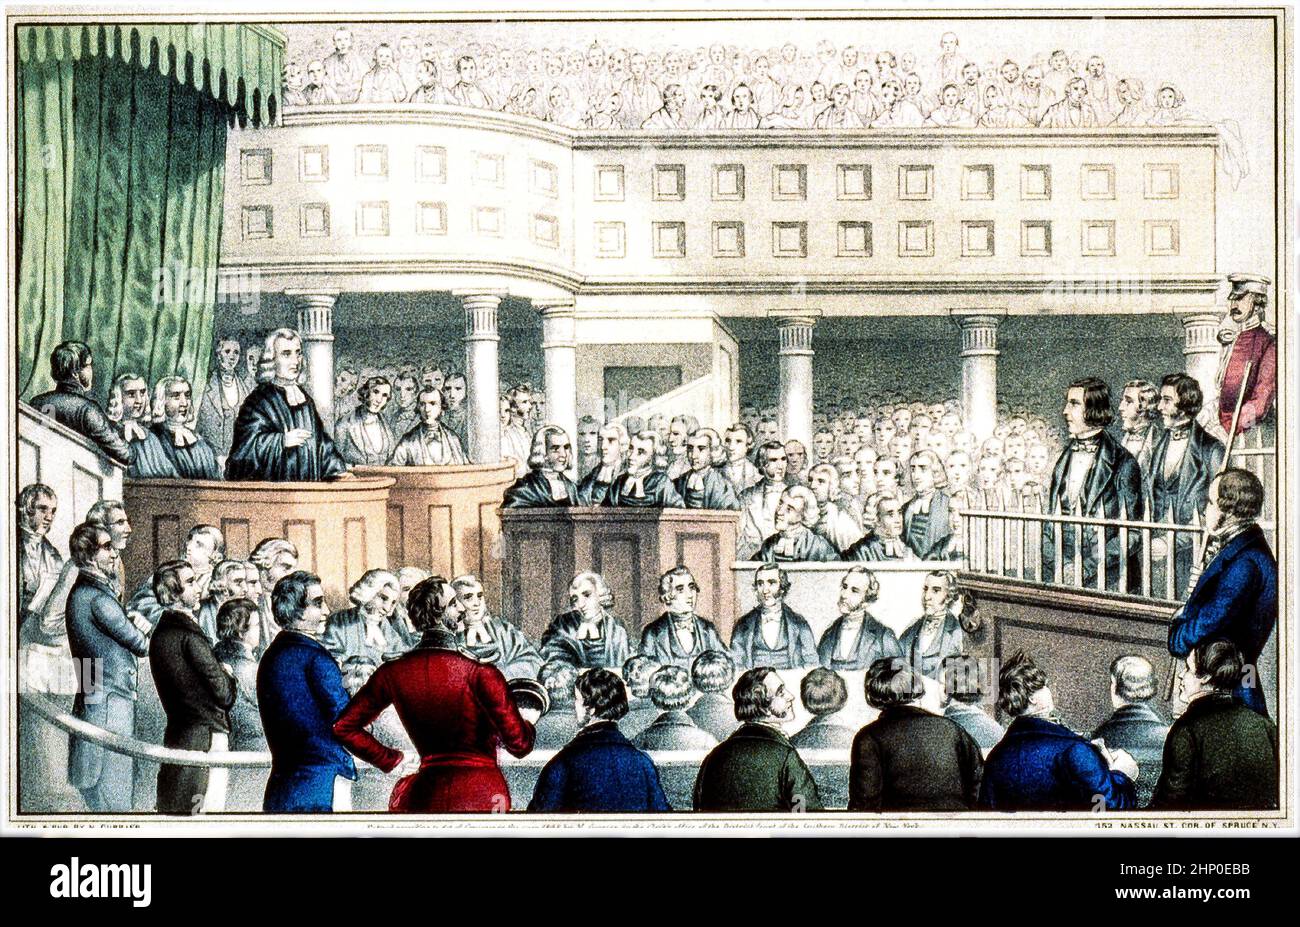 A 19th Century artwork of the Trial of  Irish patriots at Clonmel, Oct. 22nd.1848. The illustration shows Lord Chief Justice Doherty, standing (left), delivering a death sentence to Thomas. F. Meagher, Terence B. Mc.Manus, Patrick 'Donohue, members of the rebel group, Young Ireland for an unsuccessful rebellion in 1848 during which Meagher publicly unveiled the “new” tricolour in Waterford for the first time, then in to a crowd in Dublin. In August Meagher, Terence MacManus, O’Brien and Patrick O’Donoghue were arrested, tried for treason and transported to Tasmania, Australia. Stock Photo